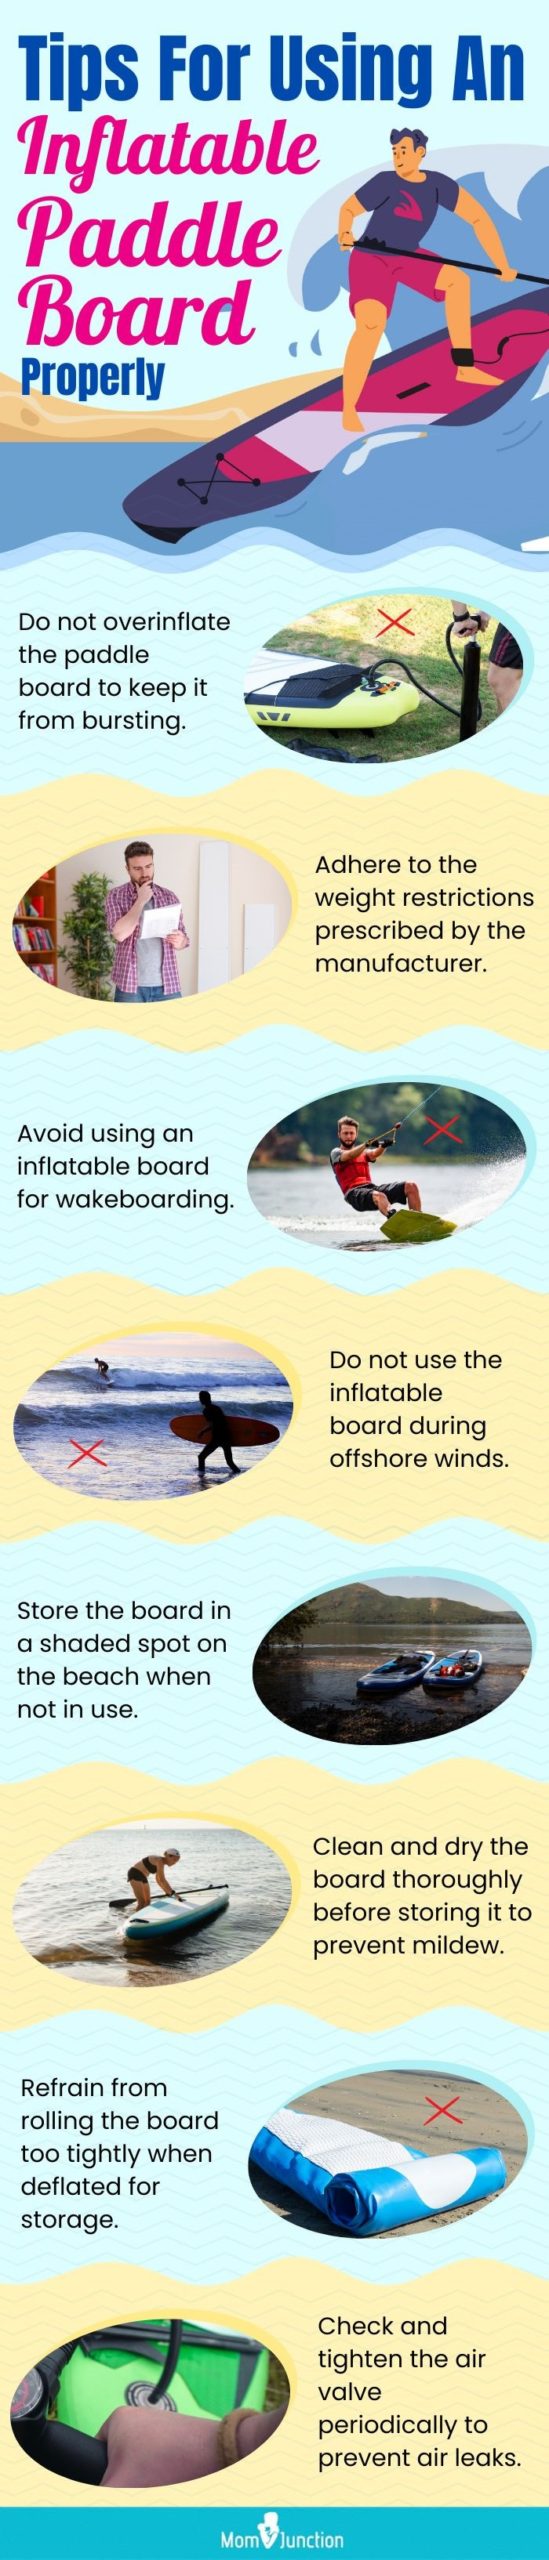 Tips For Using An Inflatable Paddle Board Properly (infographic)